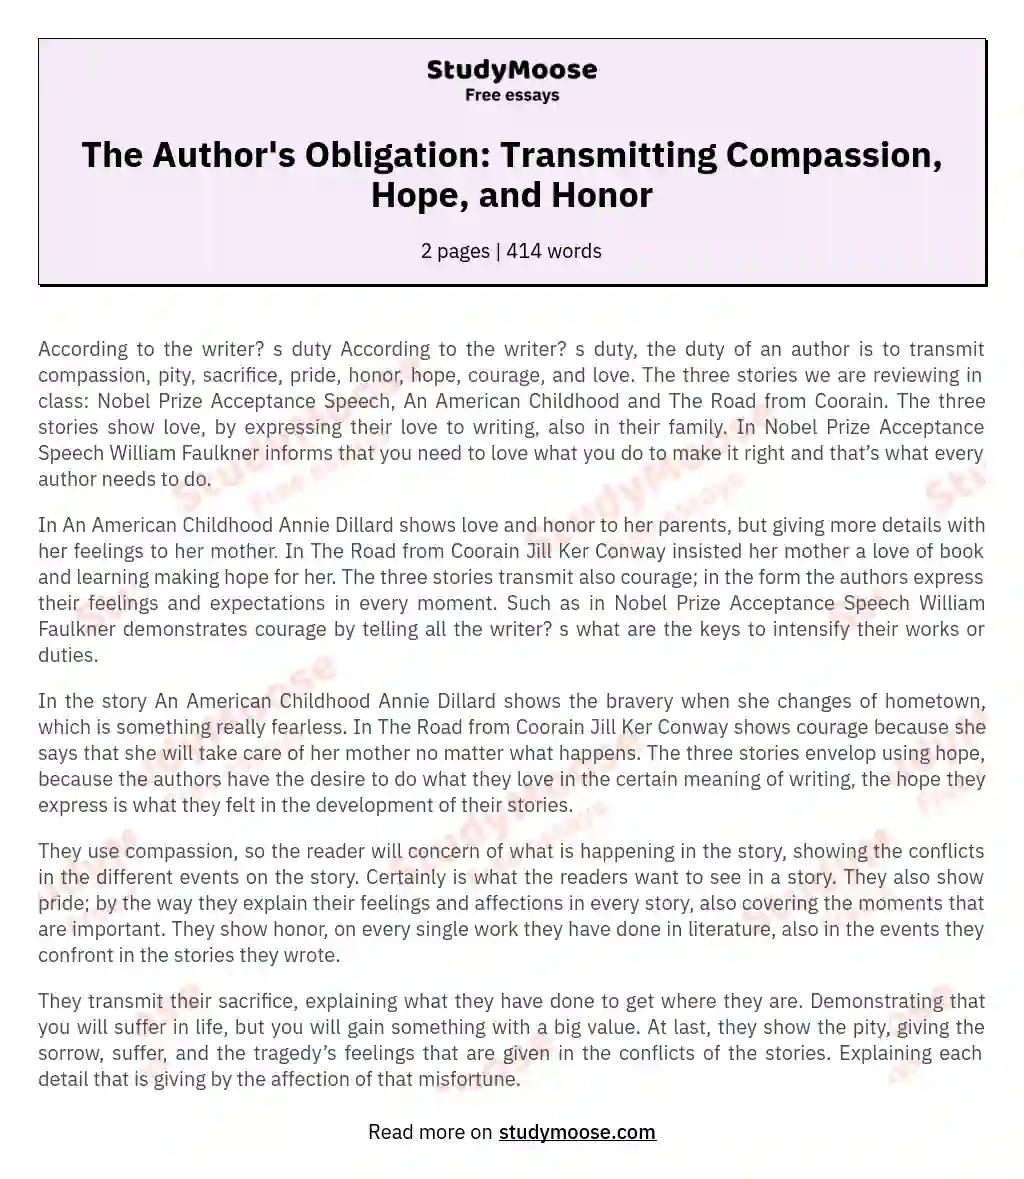 The Author's Obligation: Transmitting Compassion, Hope, and Honor essay